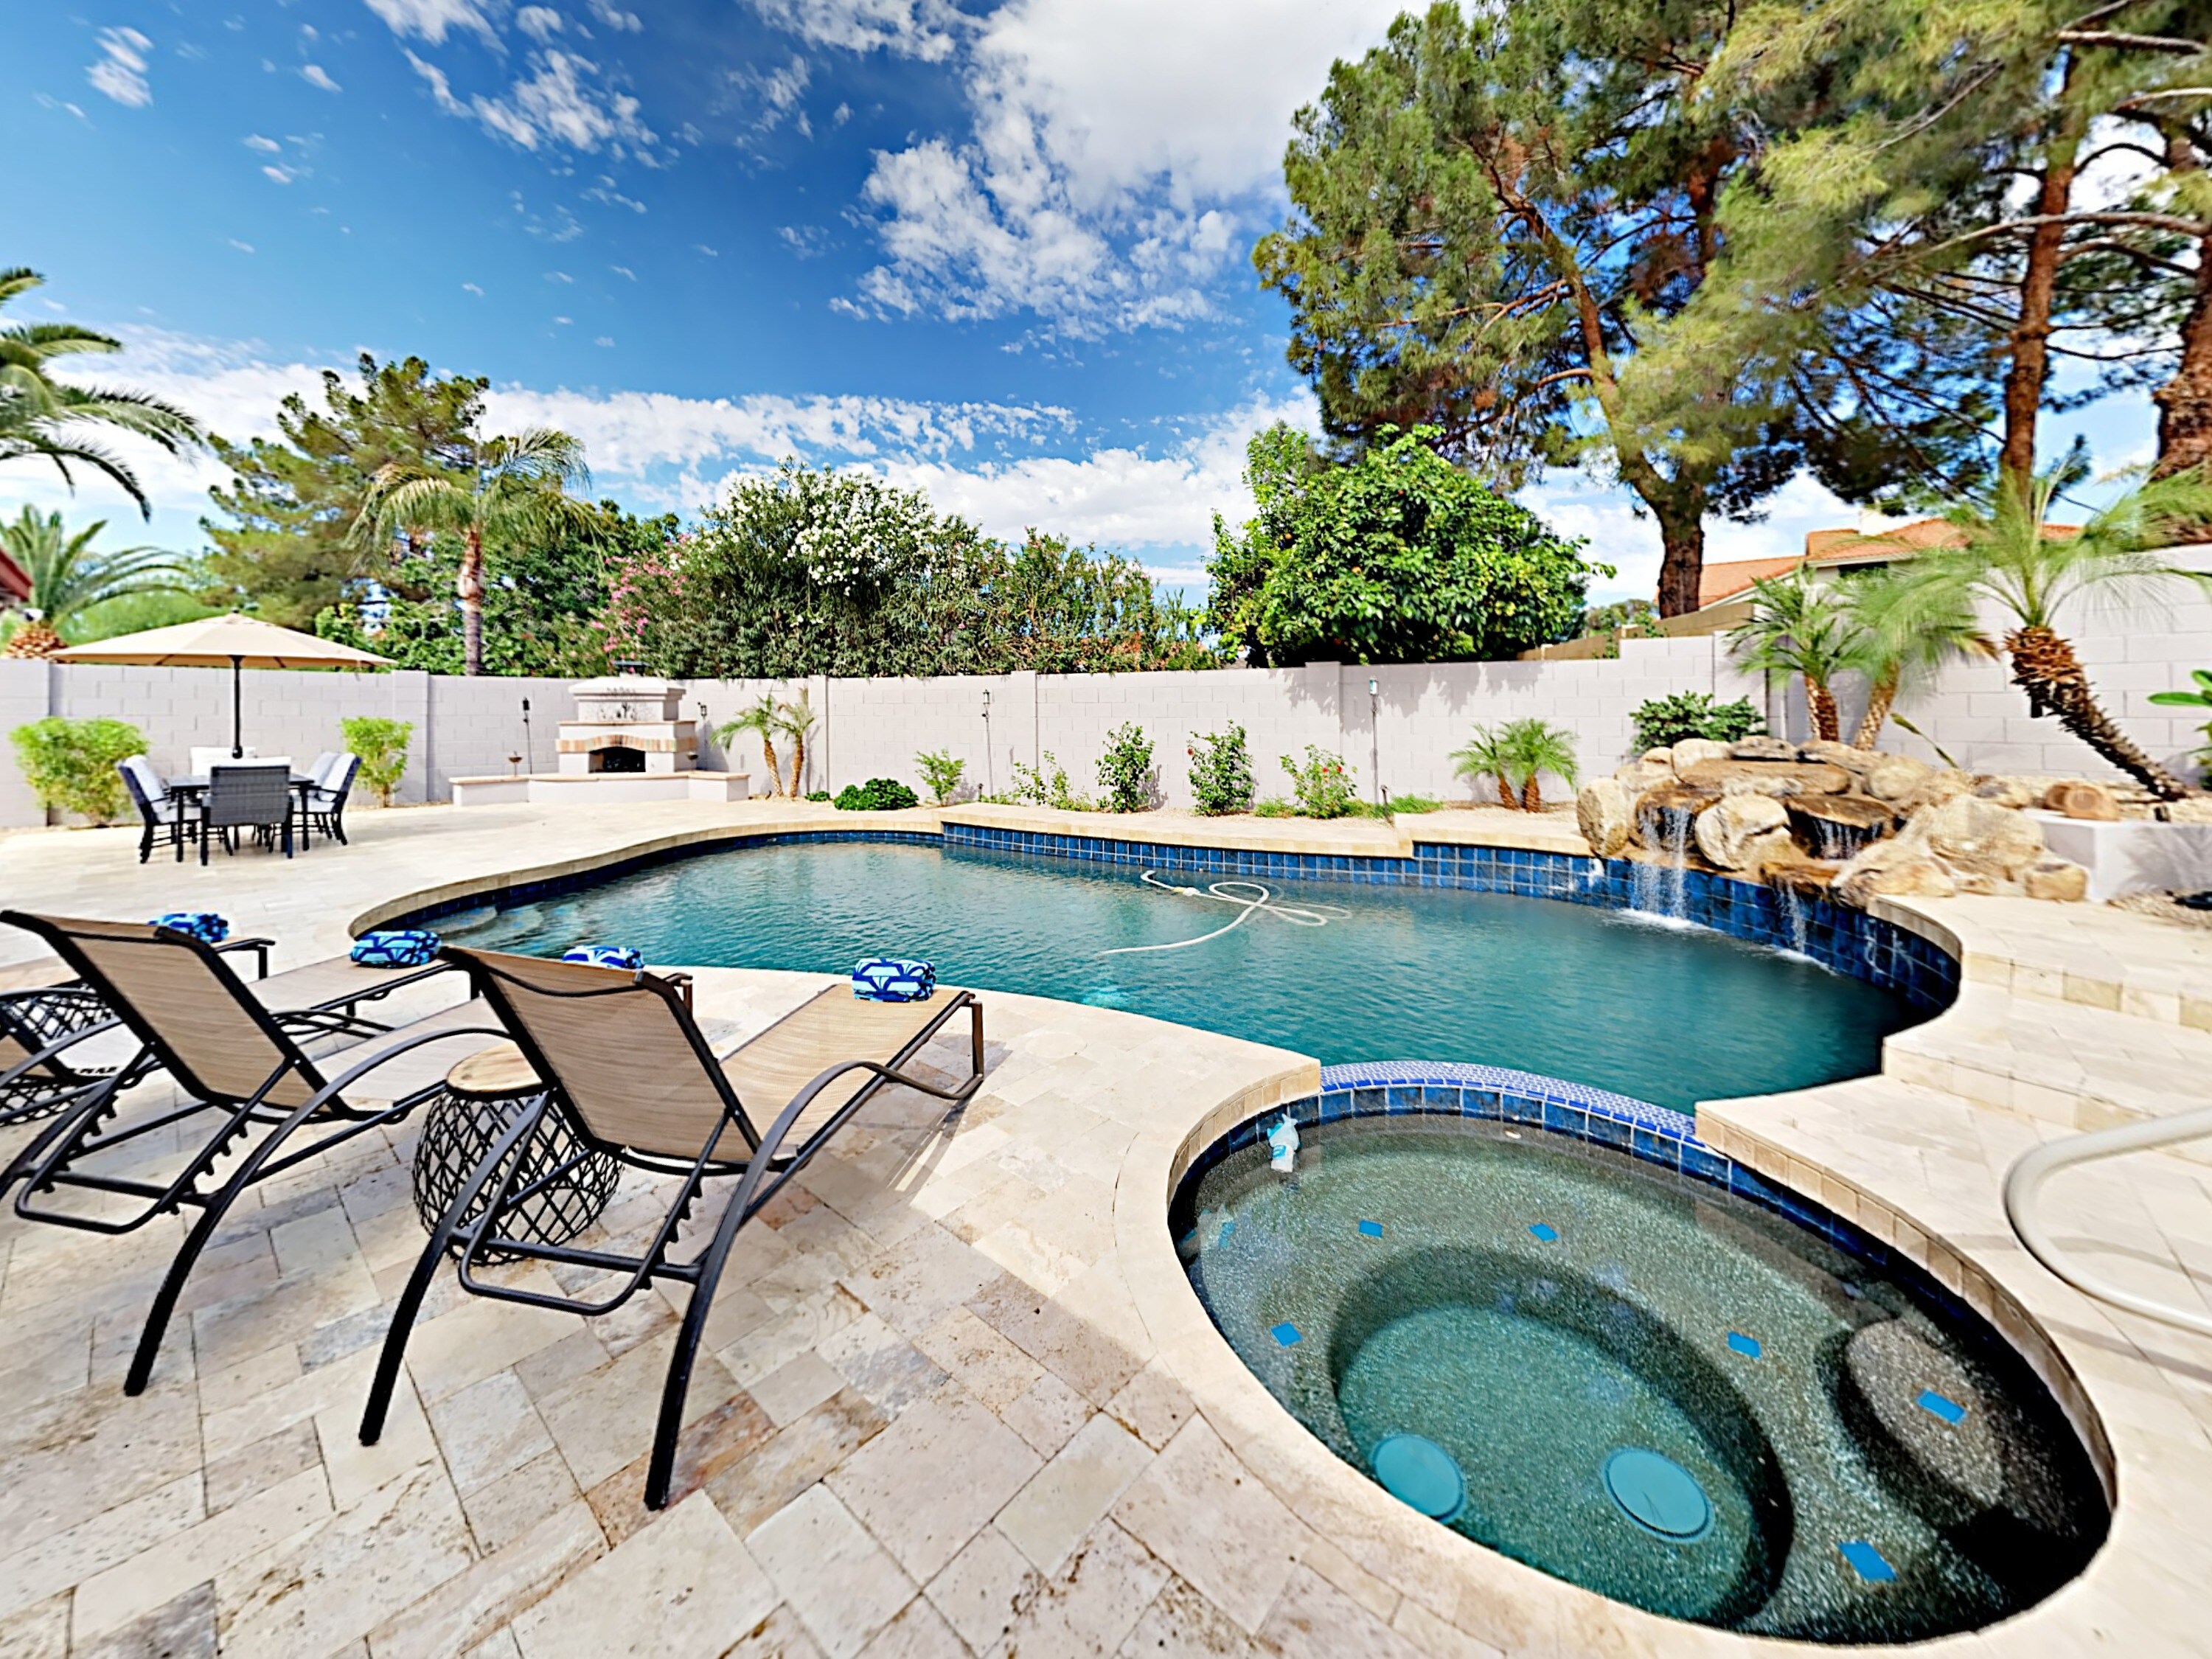 Welcome to Scottsdale! Your rental is professionally managed by TurnKey Vacation Rentals.